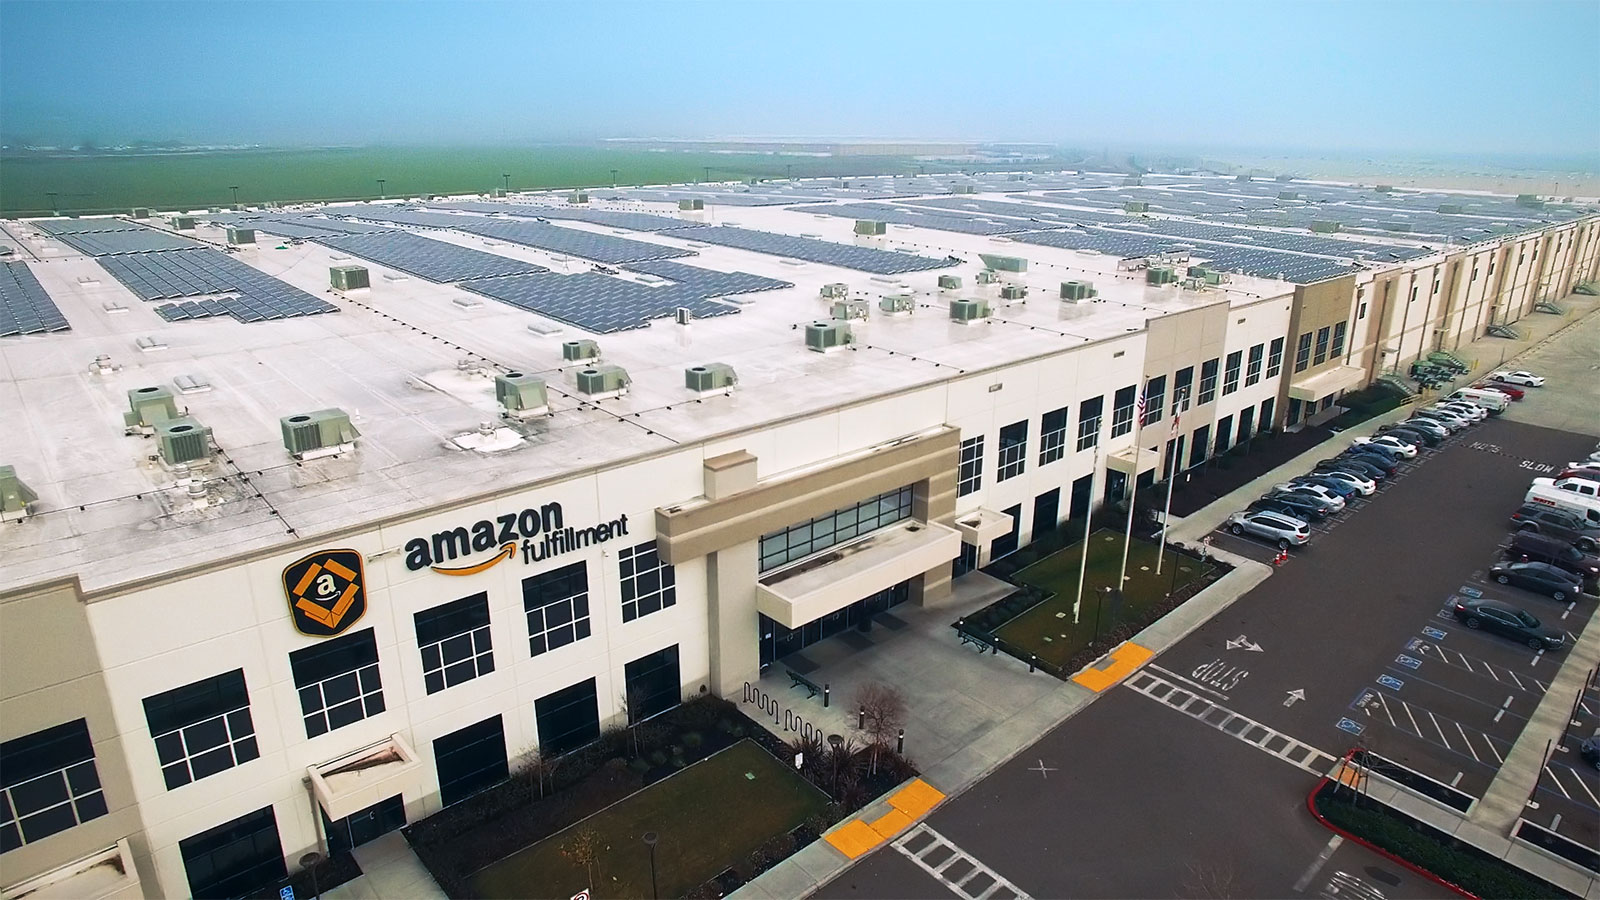 Amazon fulfillment center with solar panels on the roof